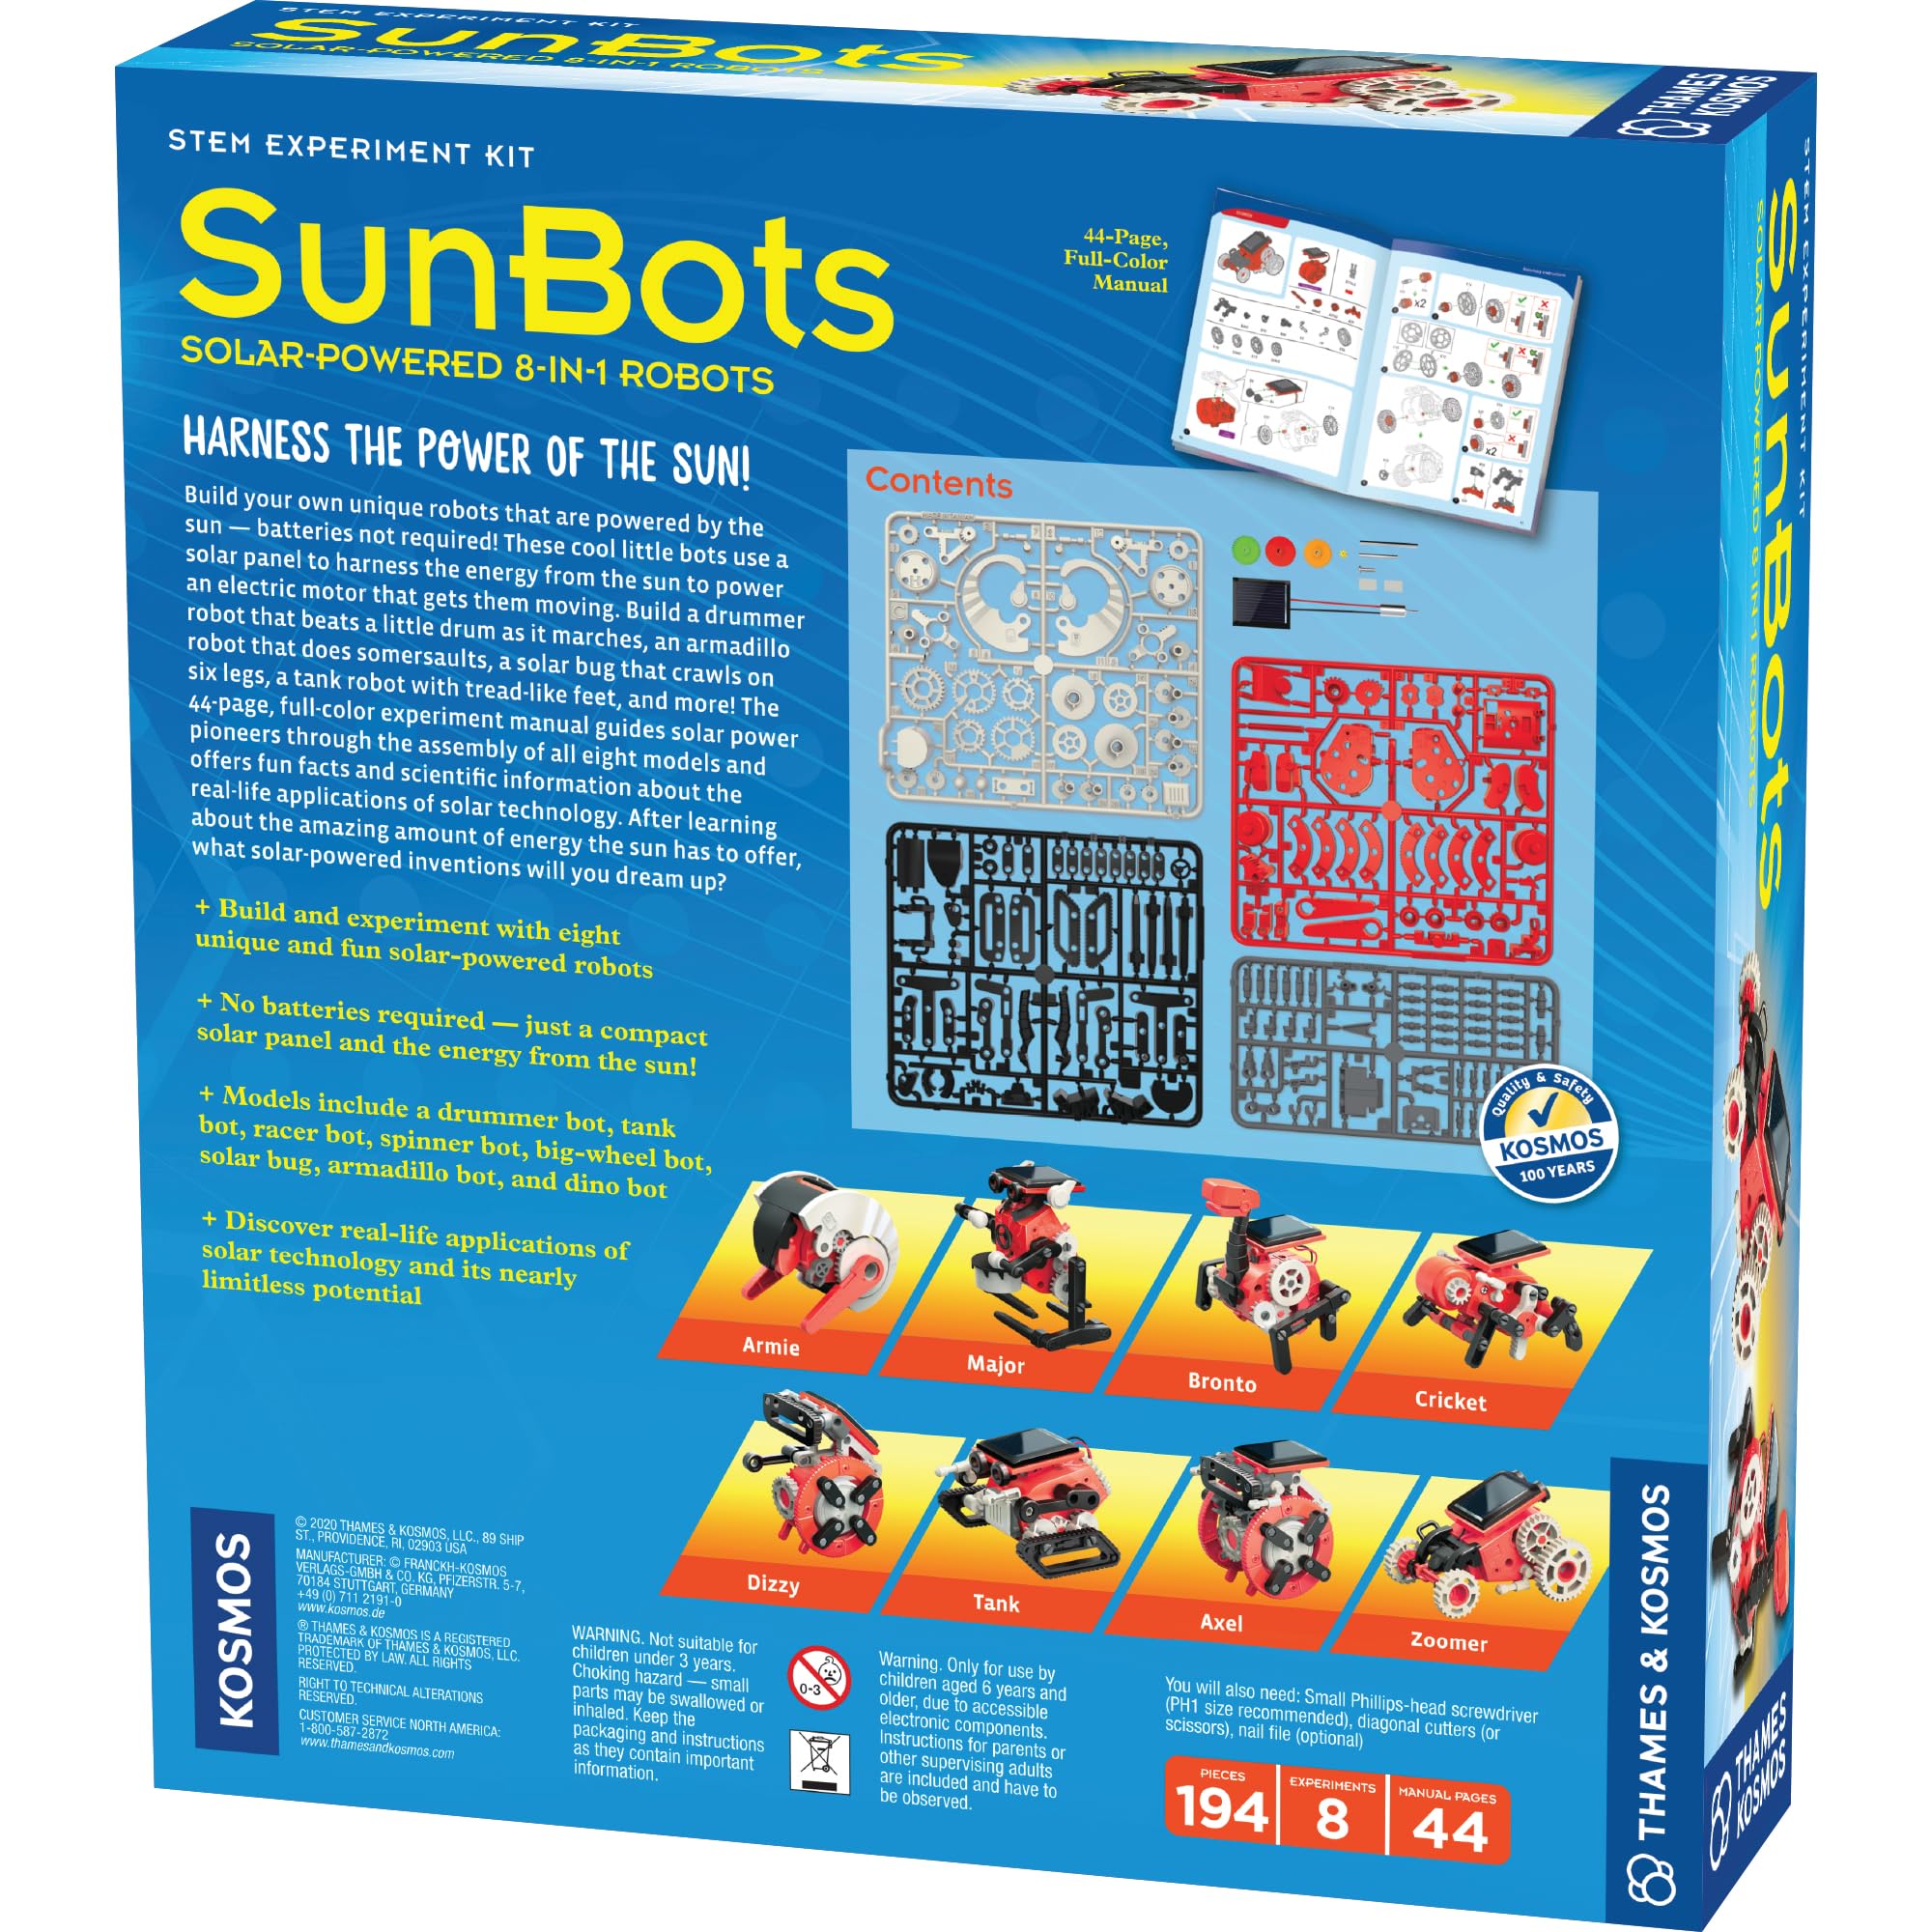 Thames & Kosmos SunBots: Solar-Powered 8-in-1 Robots STEM Experiment Kit | Build 8 Cool Solar-Powered Robots | No Batteries Required | Learn About Solar Energy & Technology | Solar Panel Included